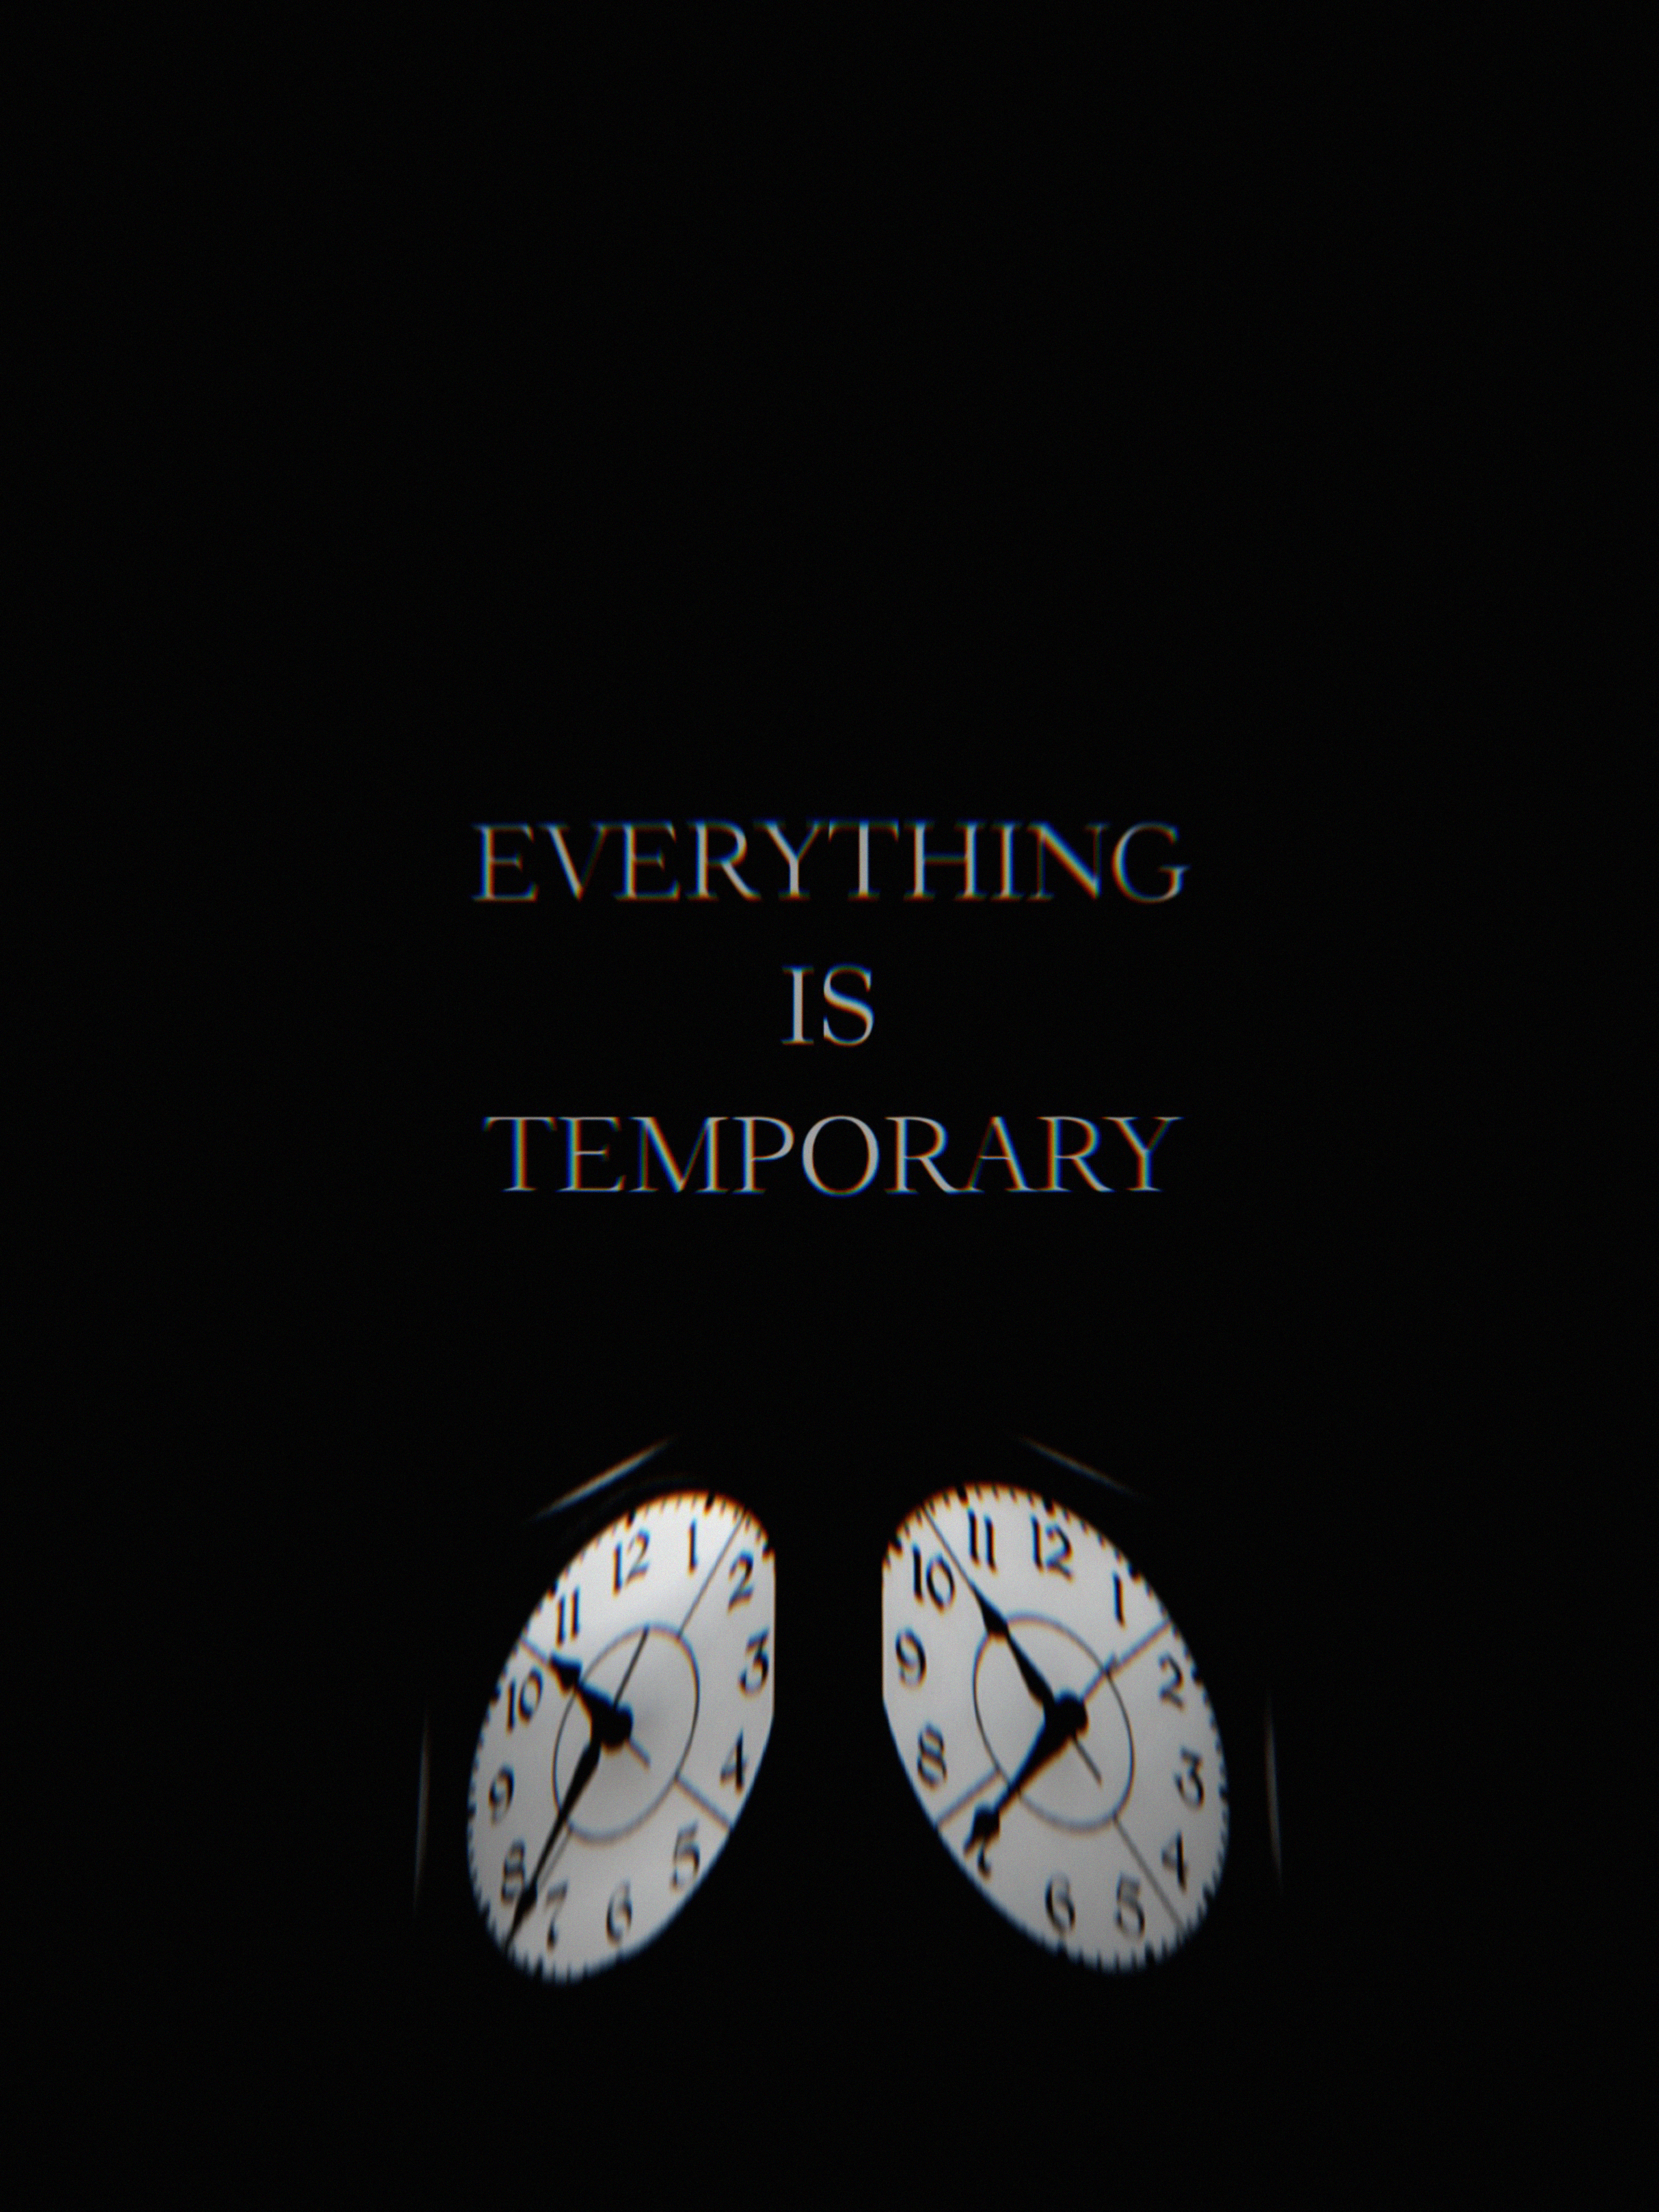 wallpapers words, clock, life, time, it's time, glitch, temporary